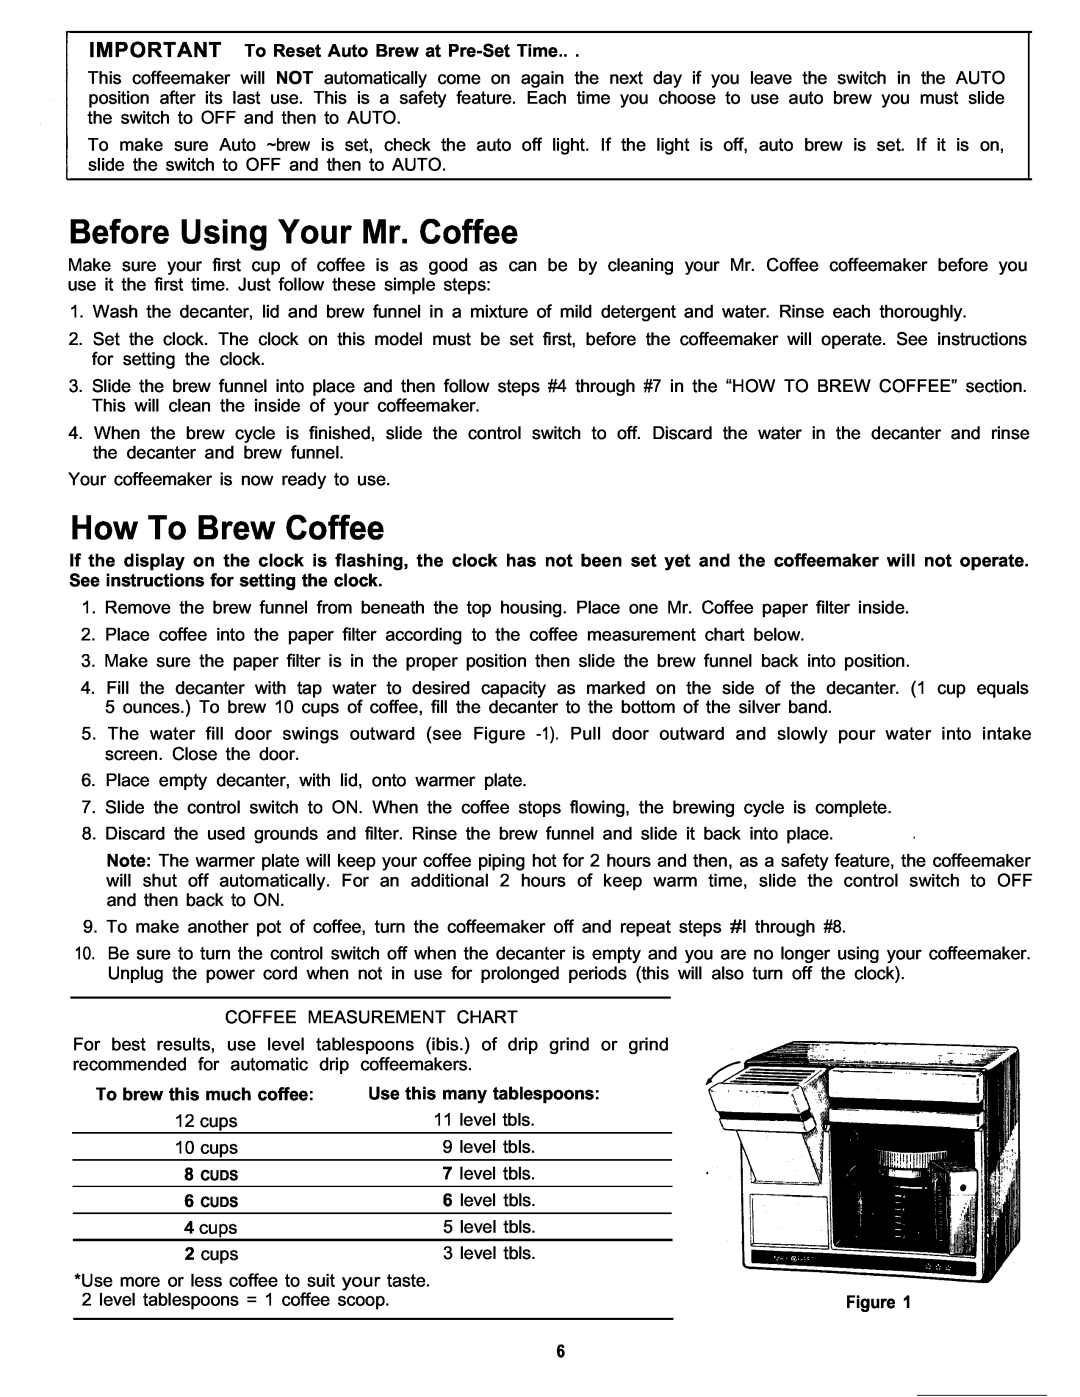 Mr. Coffee 403 Series manual Before Using Your Mr. Coffee, How To Brew Coffee, IMPORTANT To Reset Auto Brew at Pre-SetTime 